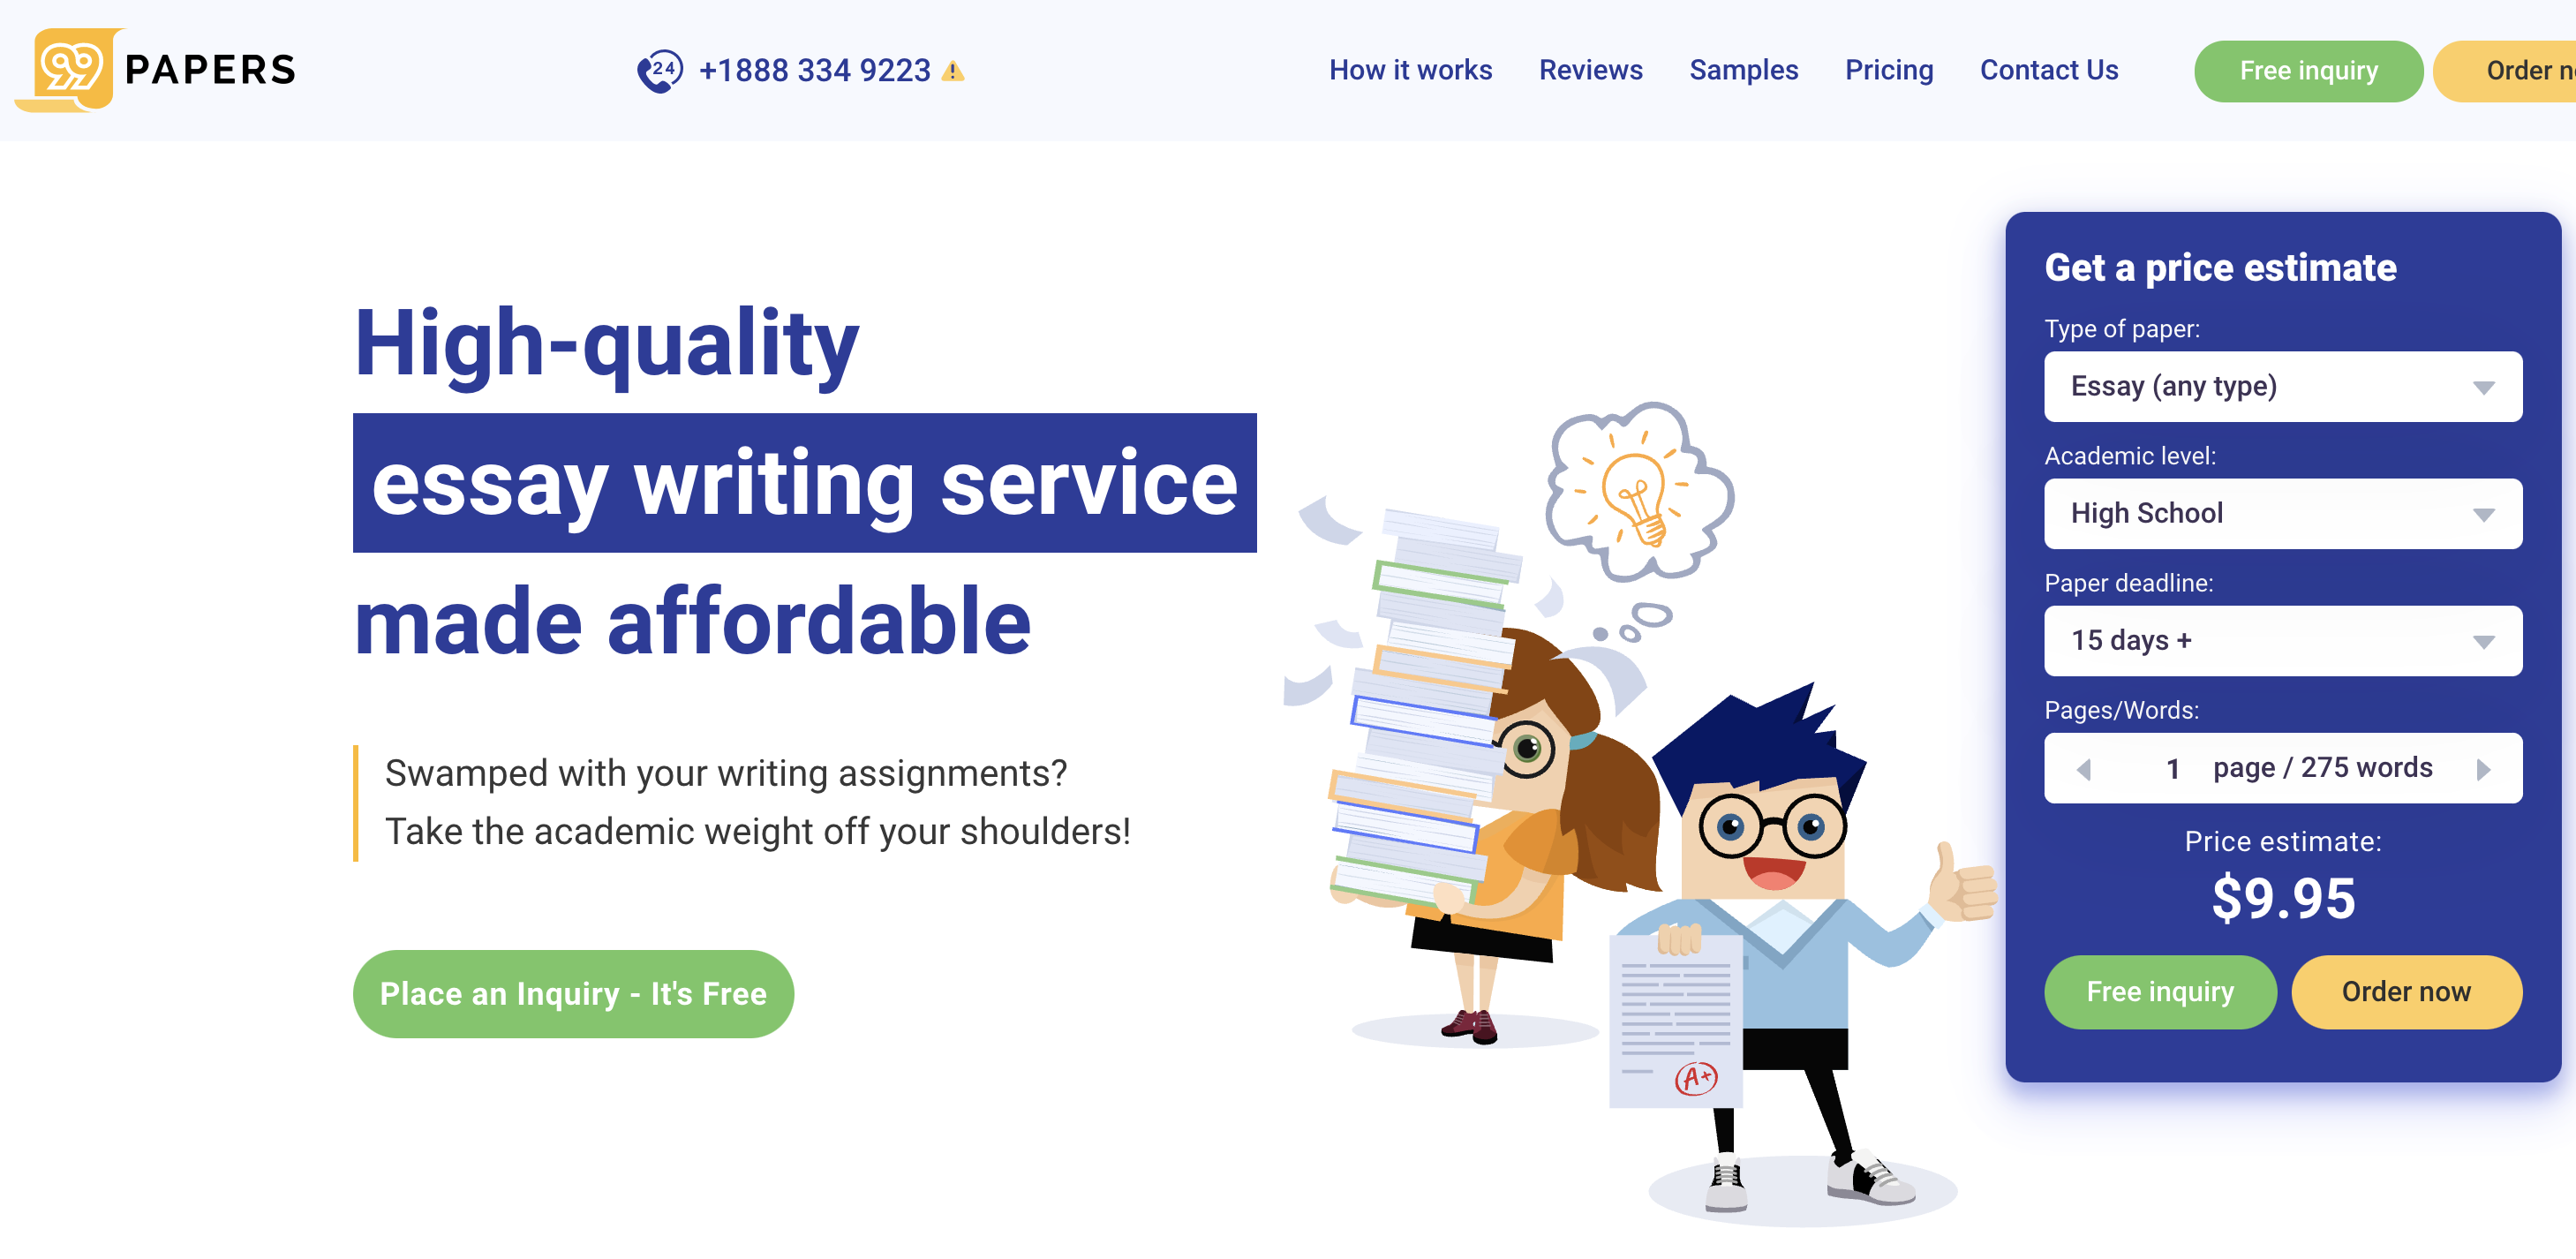 Role Of Essay Writing Services In Students Academic Life – Arab essay